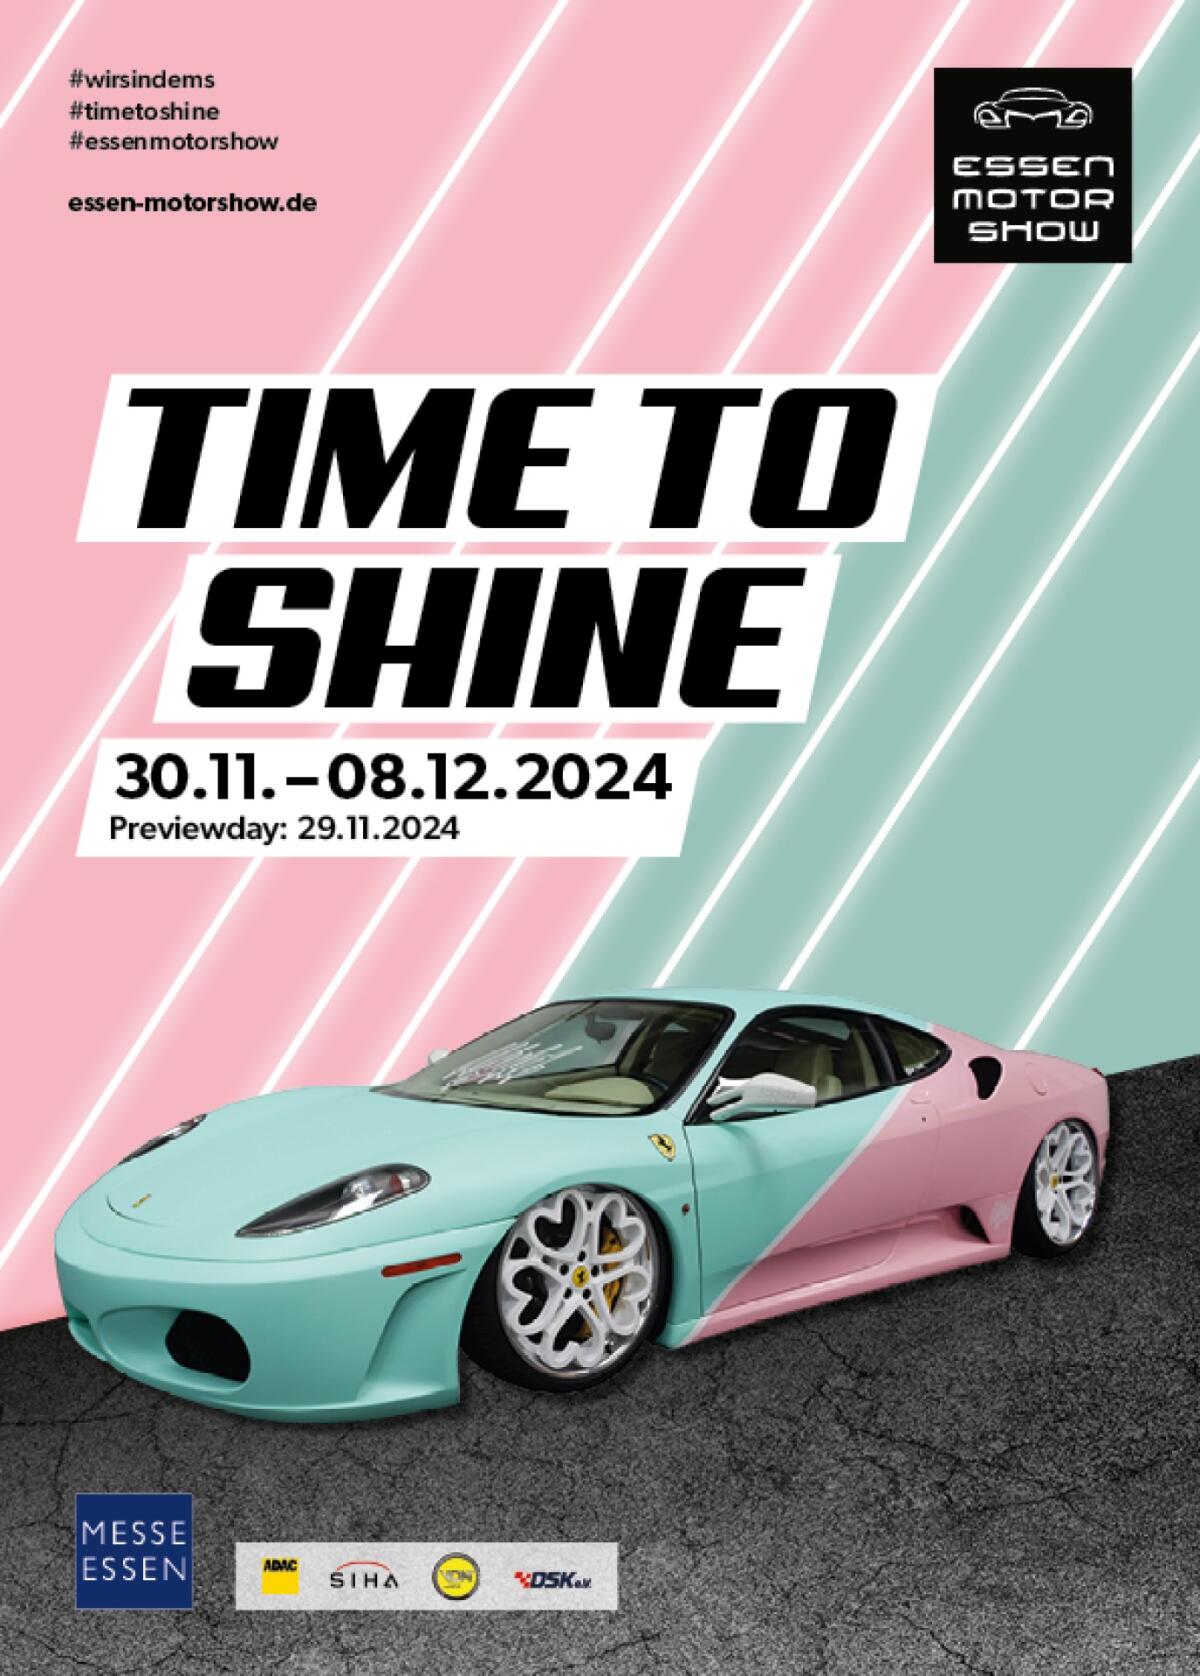 Essen Motor Show advertises with heart and trendy colors